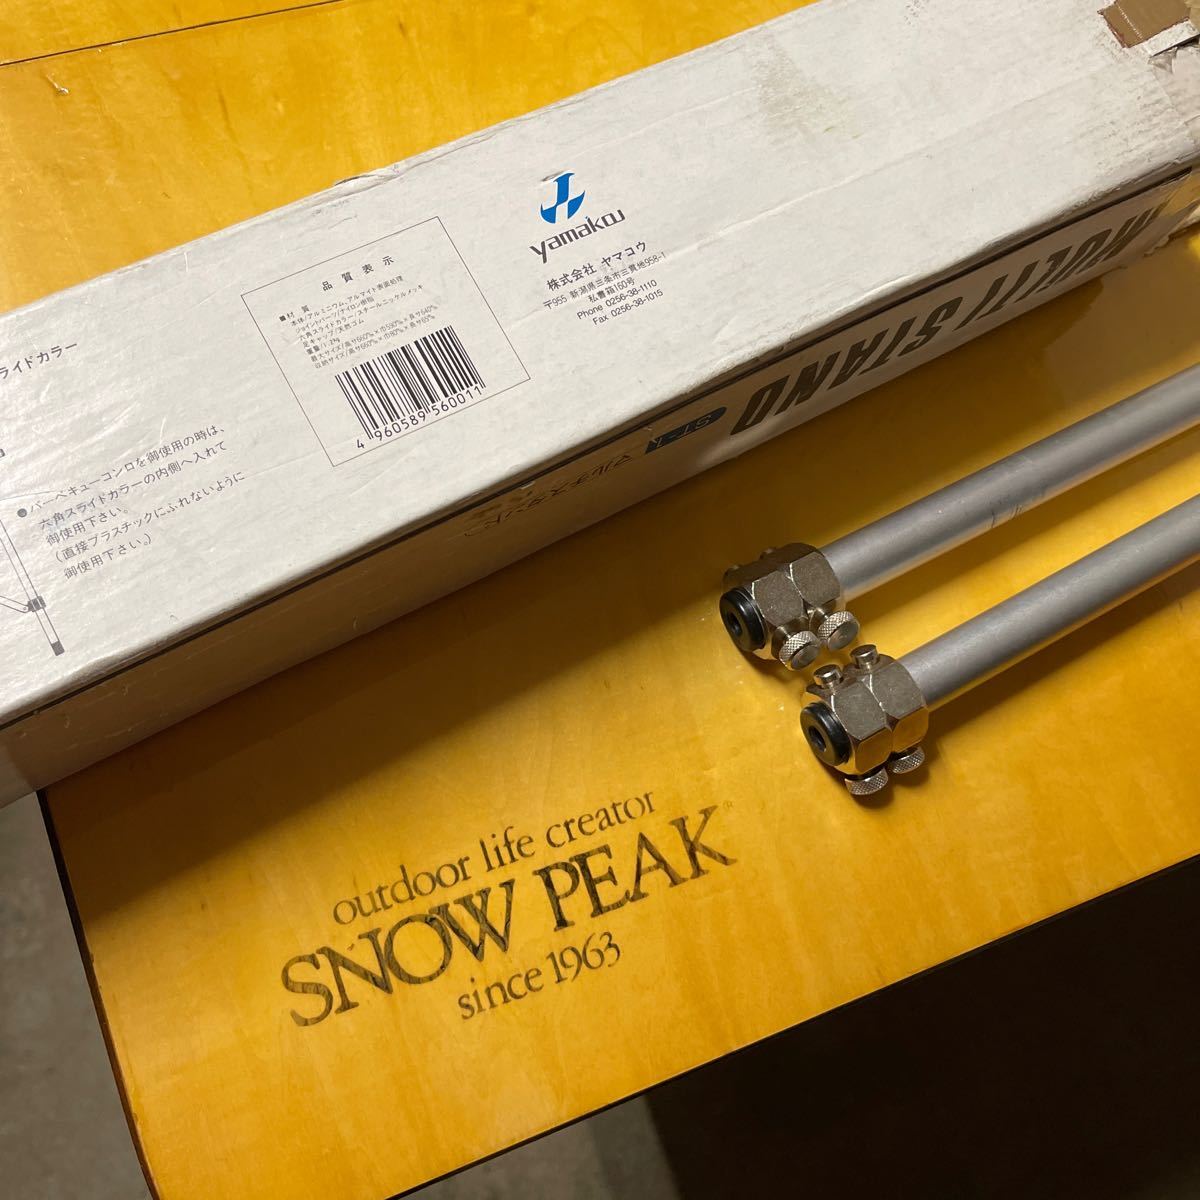 SNOWPEAK Snow Peak records out of production 4 point set adjustable F. table LV-21 field kitchen table yamakou era multi stand ST-1